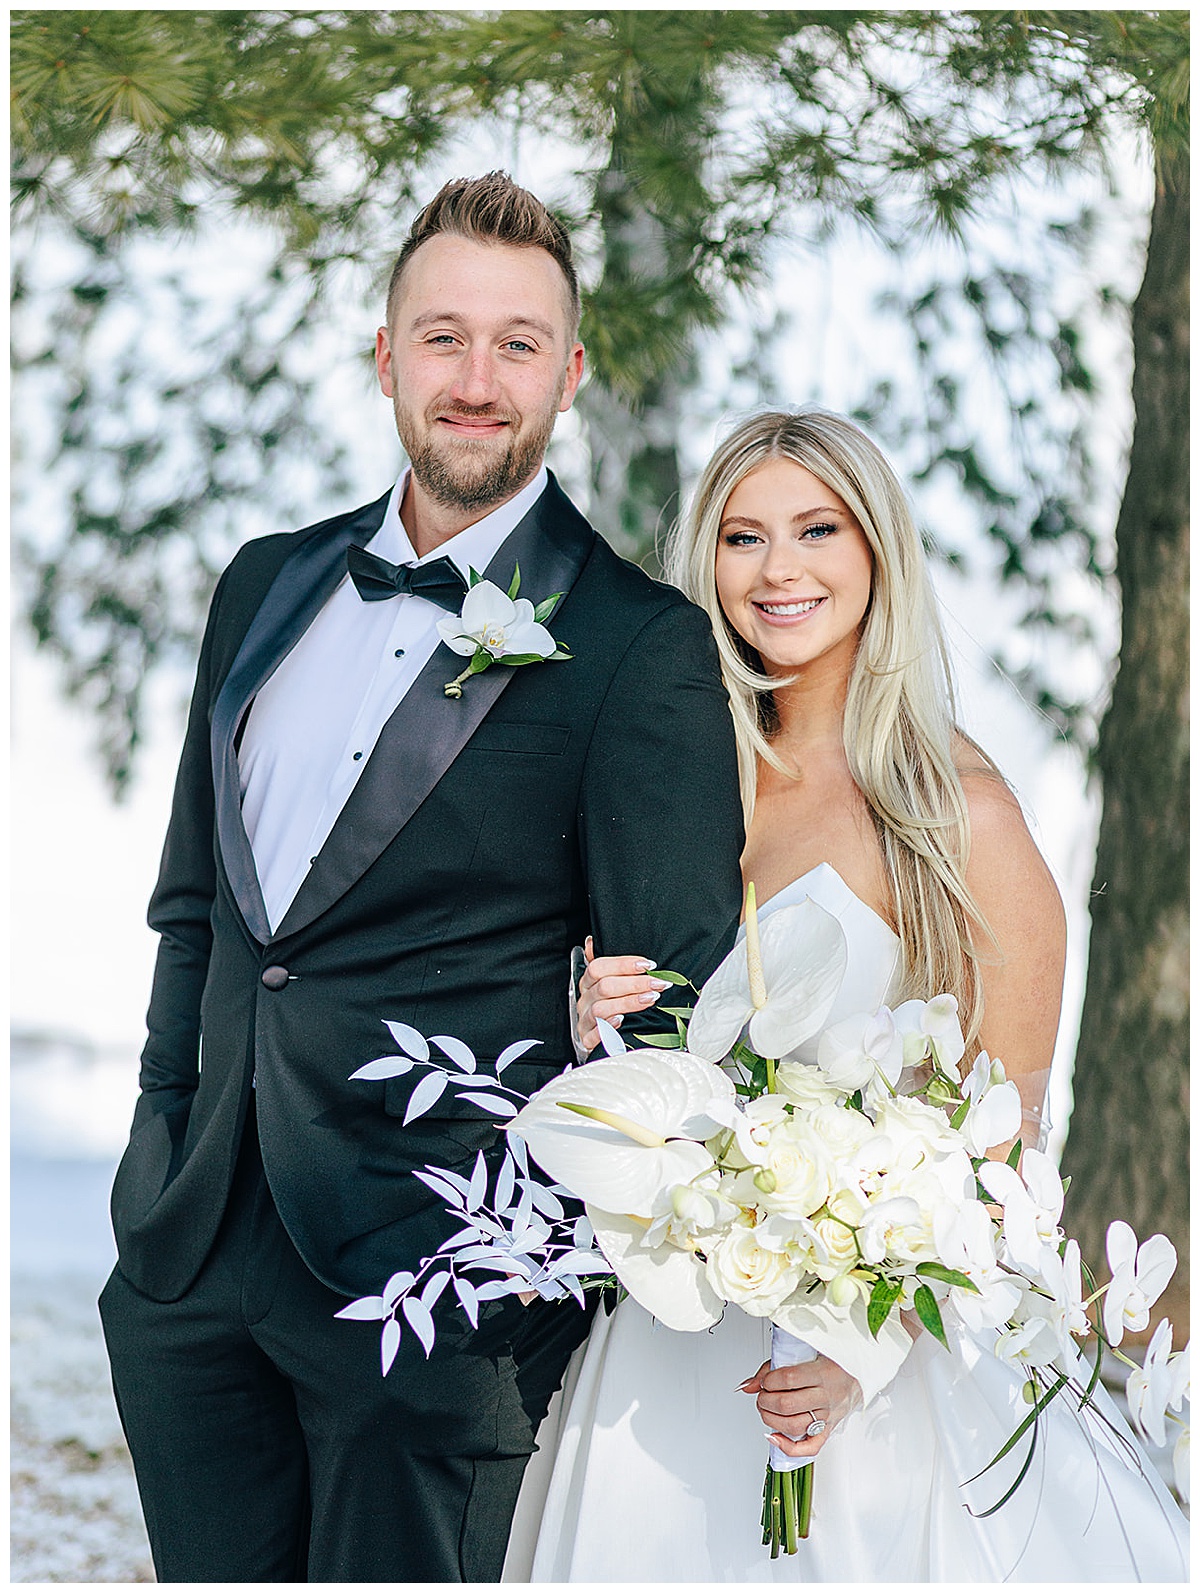 Couple hold each other and smile for Snowy Winter Wonderland Wedding